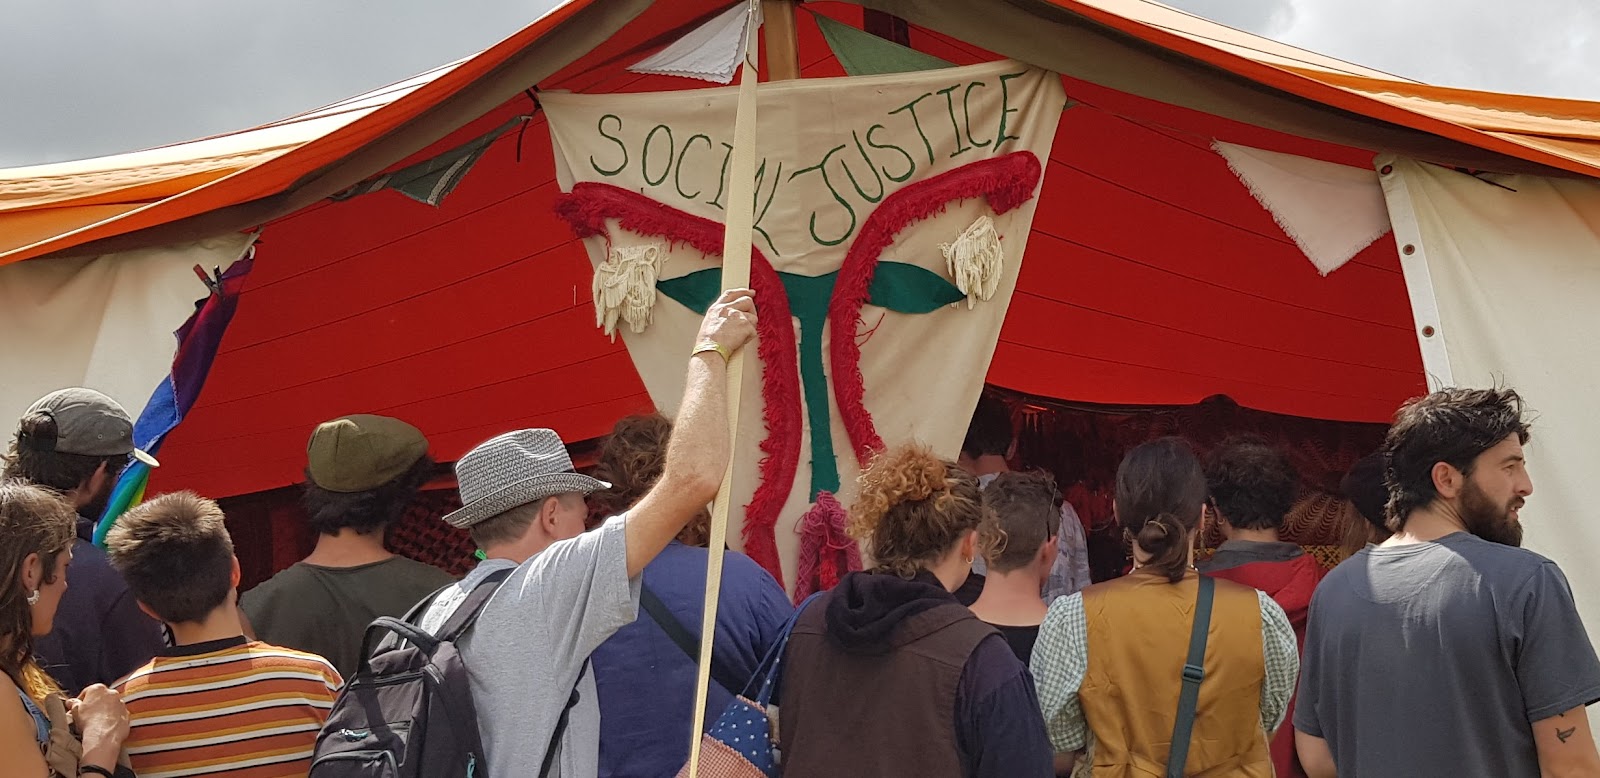 People spill out of a red and white tent, labelled Social Justice. 